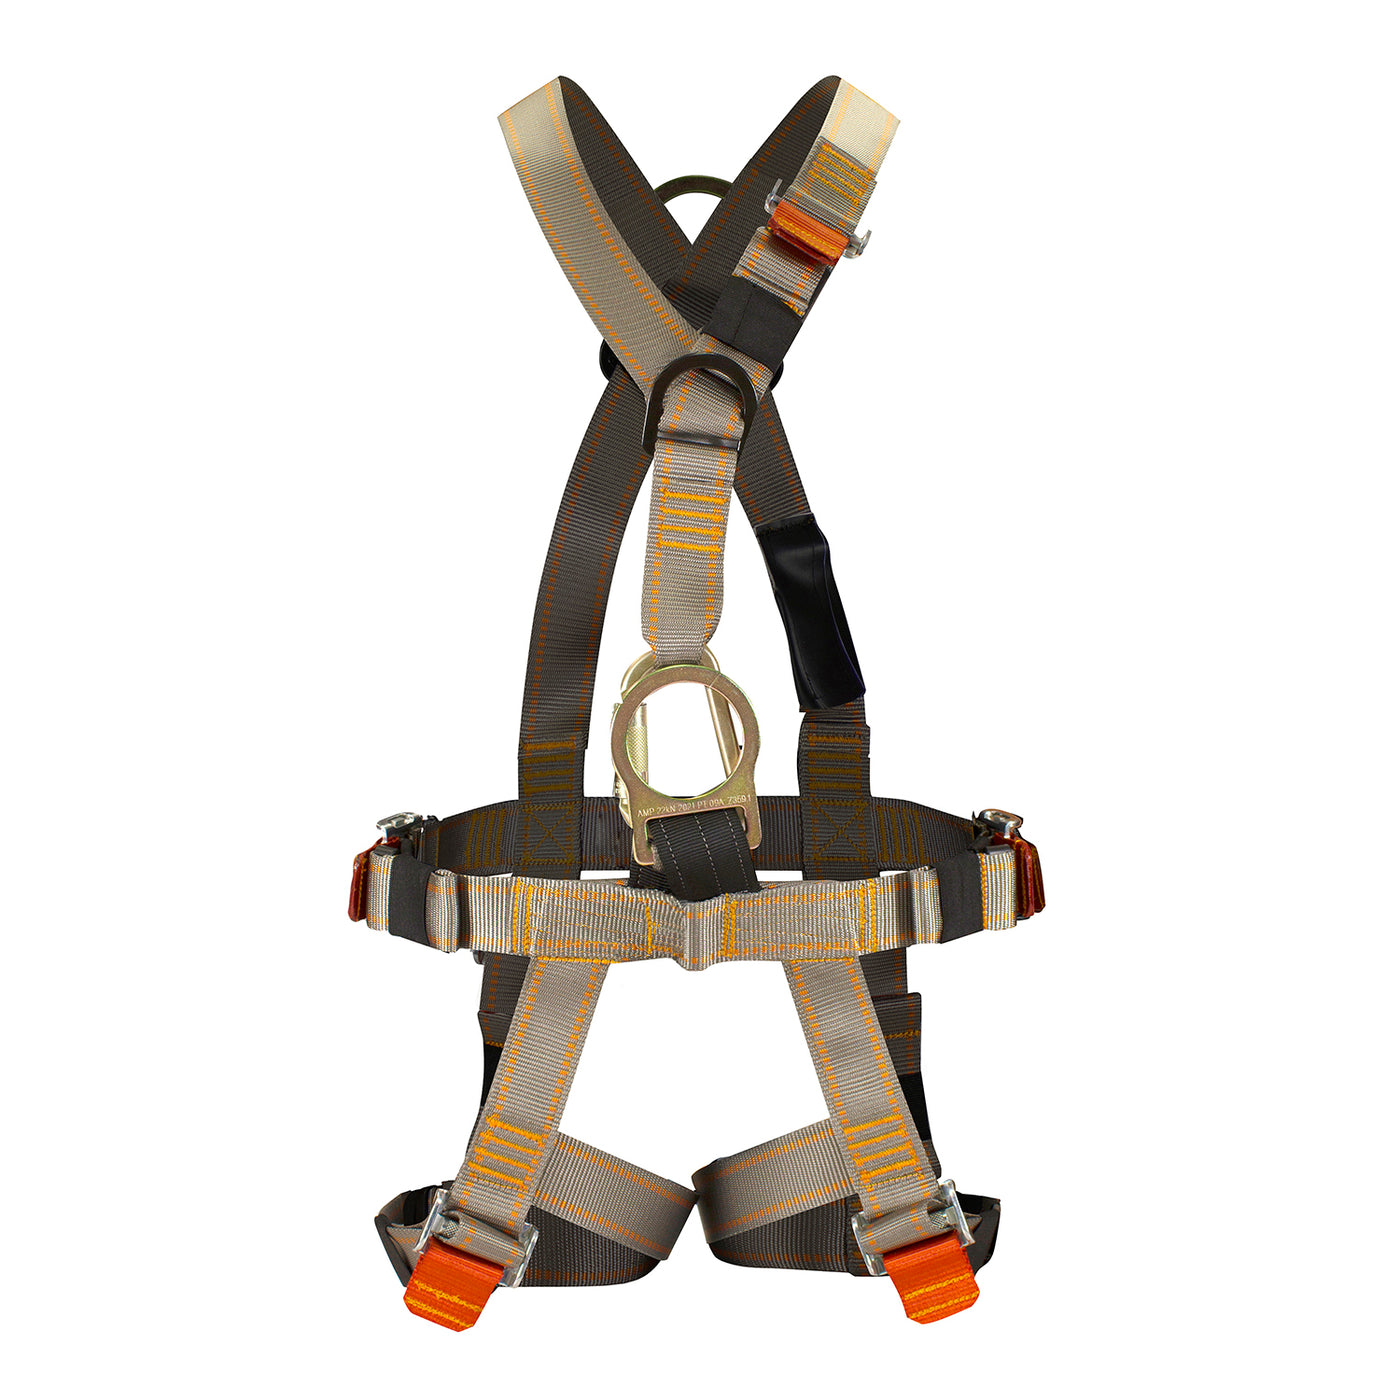 v-style full body safety harness with d-ring and seven adjuster buckles